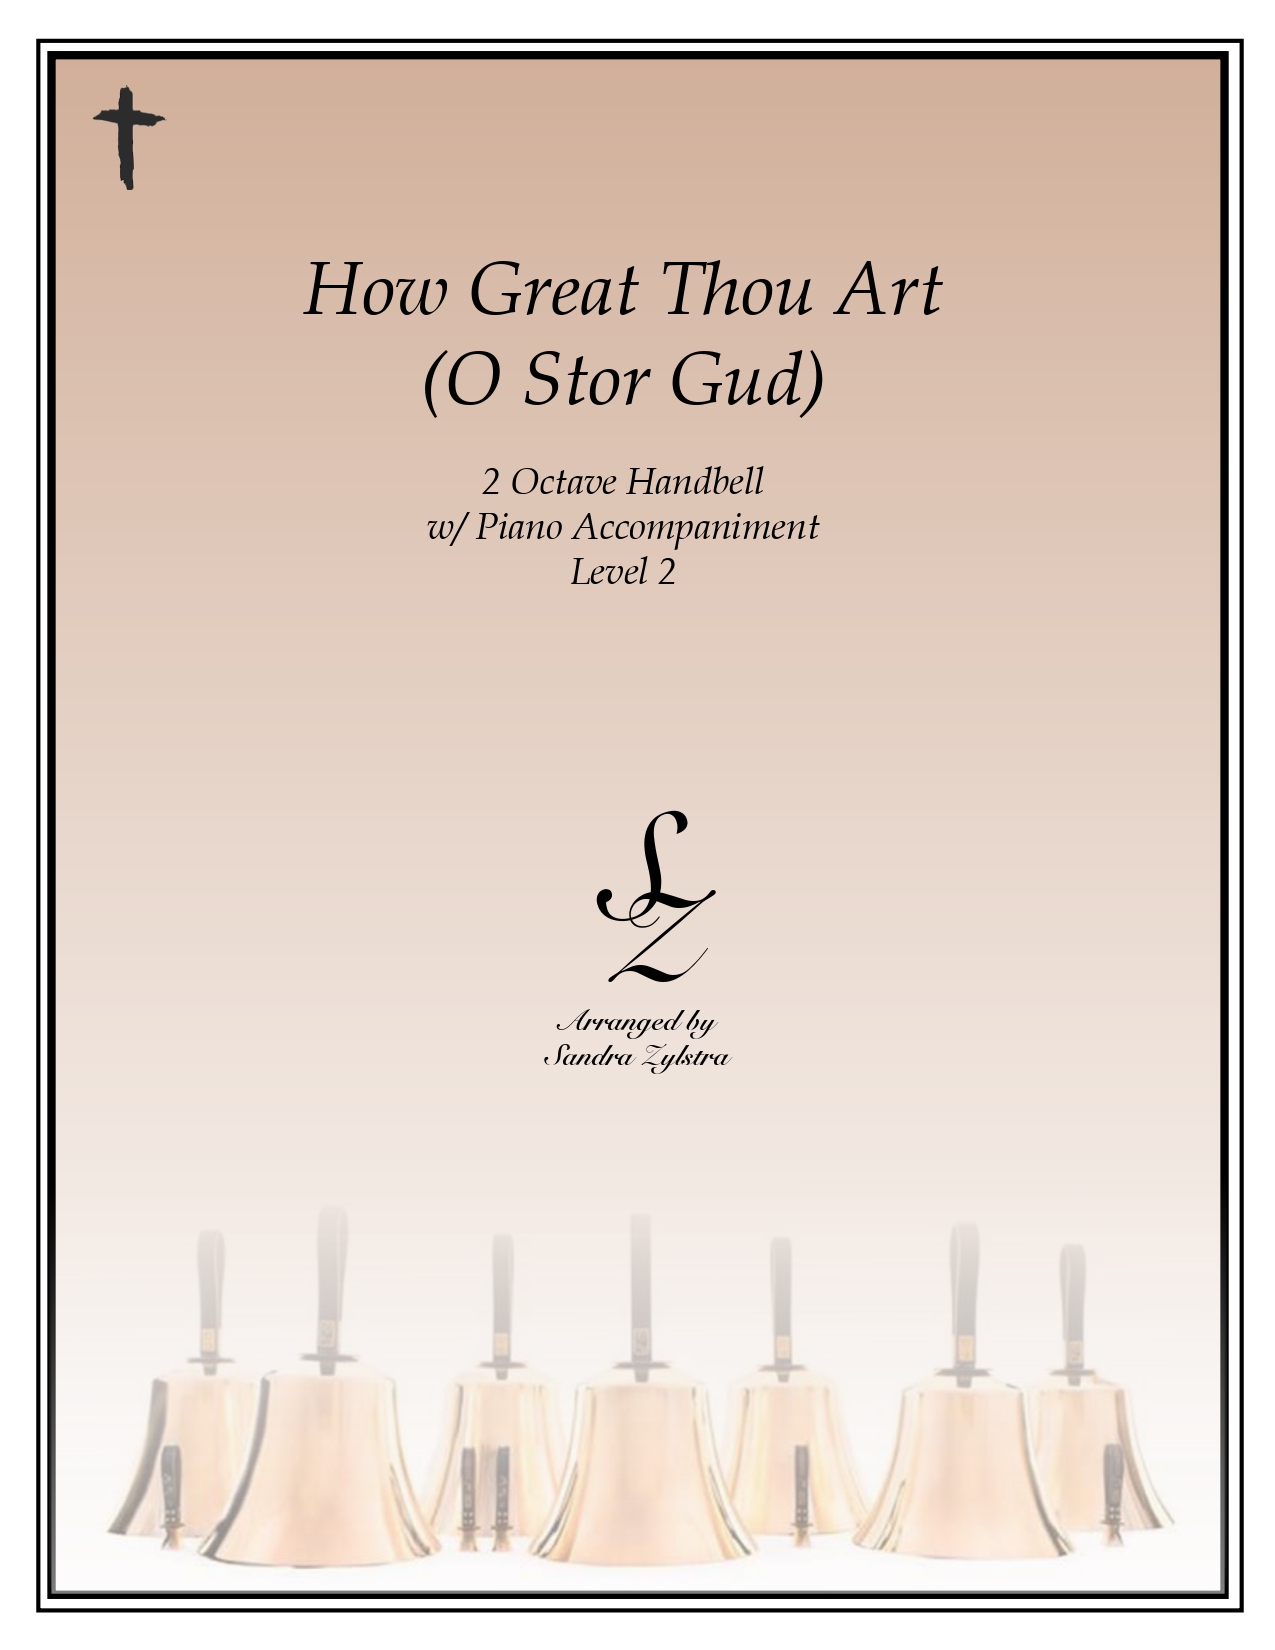 How Great Thou Art 2 octave handbell piano part cover page 00011